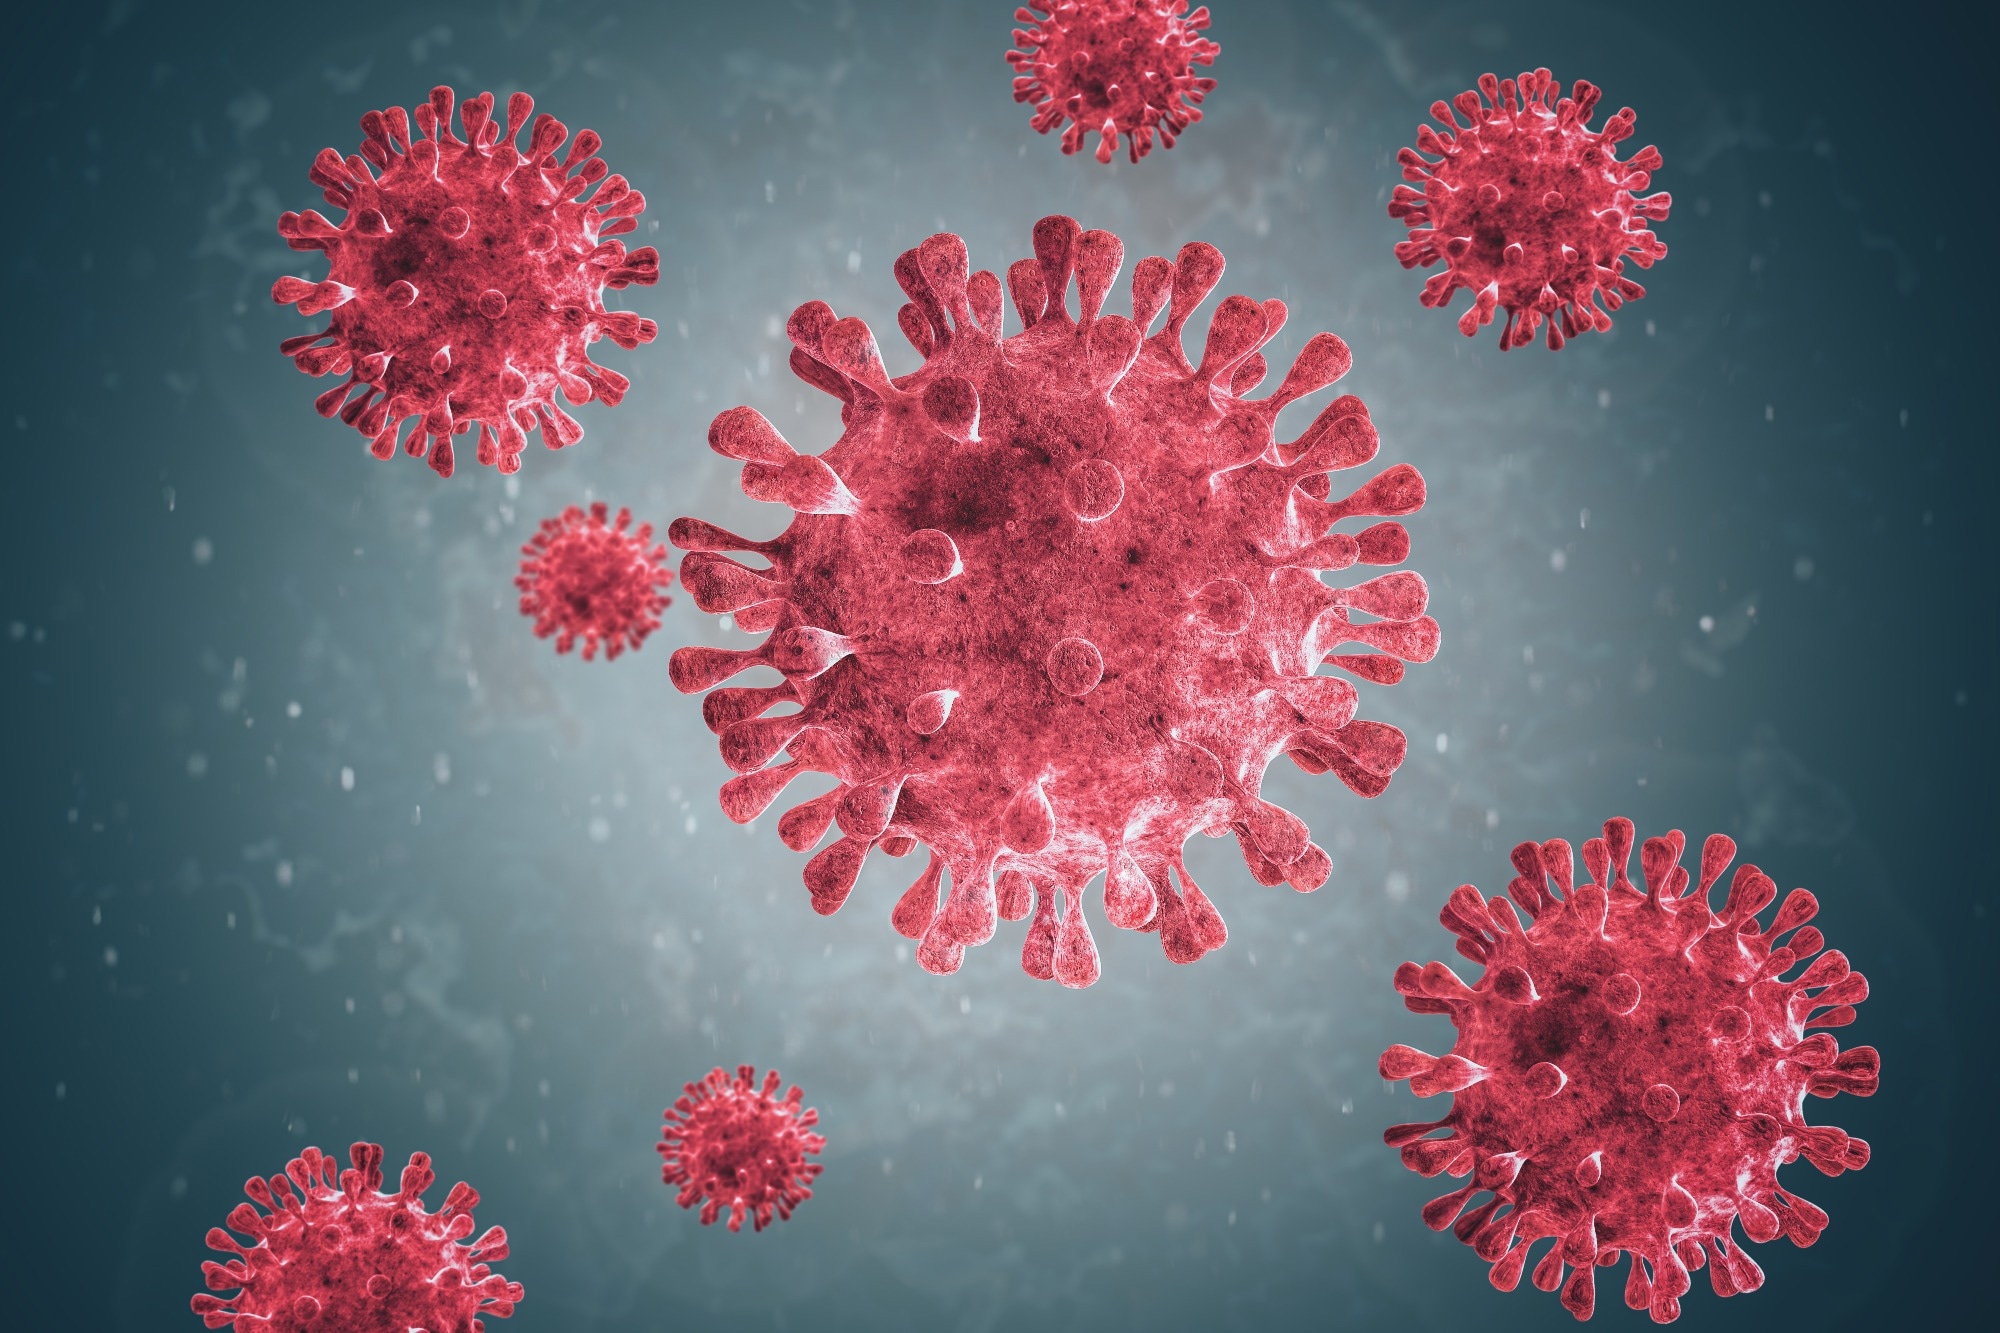 Study: The emergence, impact, and evolution of human metapneumovirus variants from 2014 to 2021 in Spain. Image Credit: VO IMAGES / Shutterstock.com